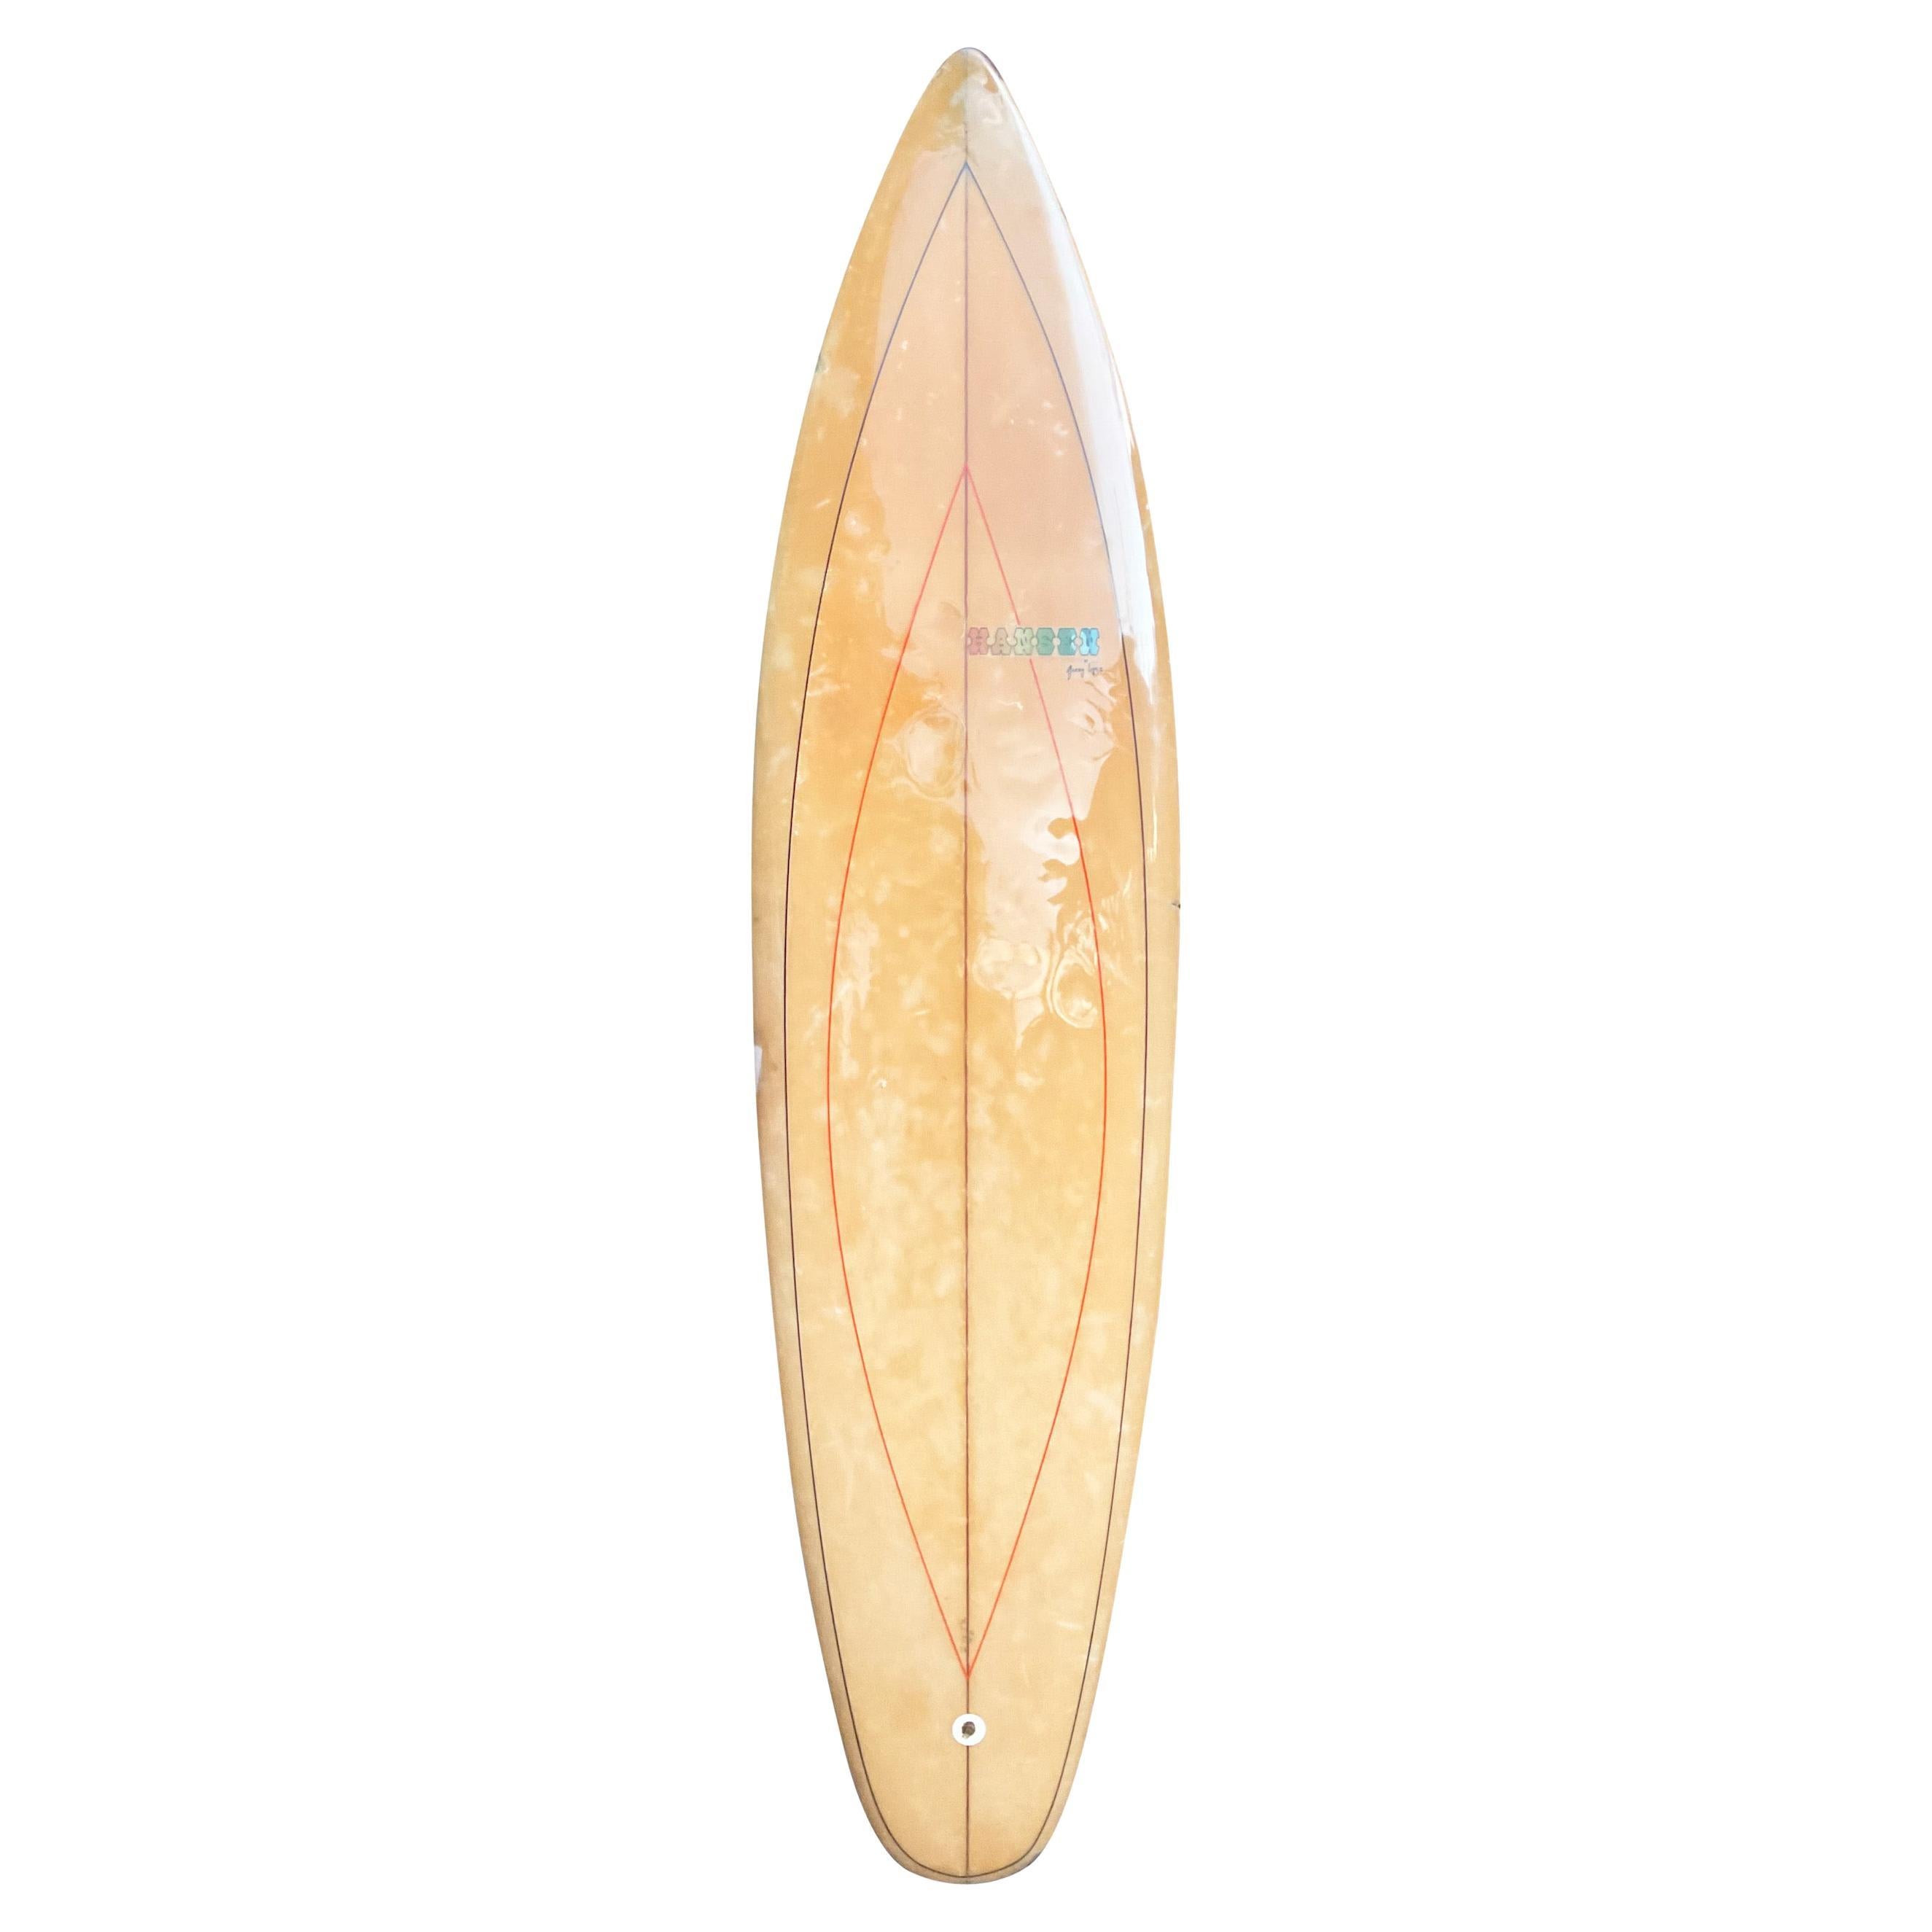 1960s Vintage Gerry Lopez Surfboard by Hansen Surfboards For Sale